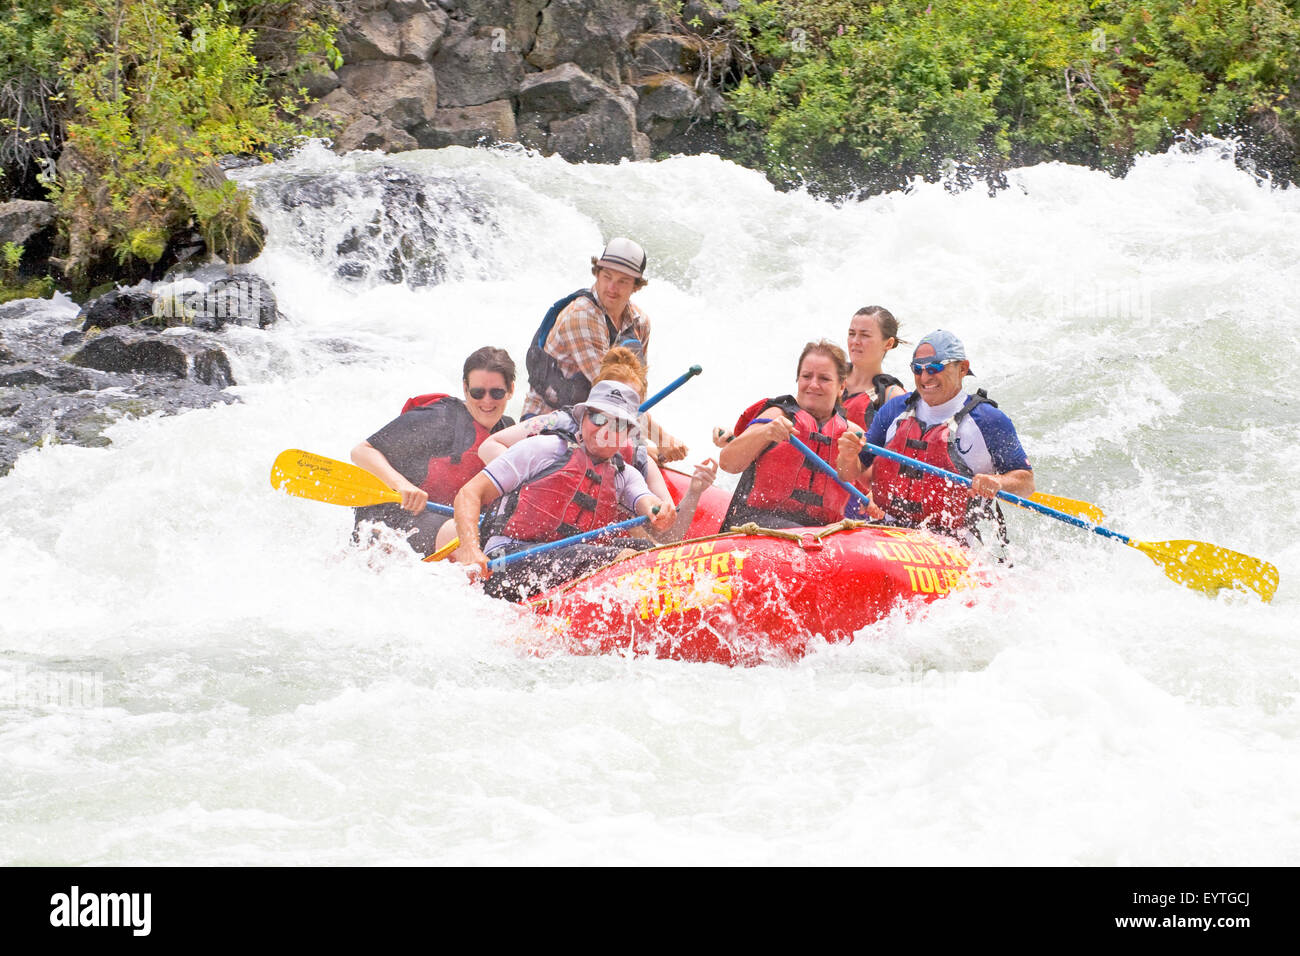 Whitewater rafters during the summer onBig Eddy Falls on the Deschutes River near Bend, Oregon Stock Photo